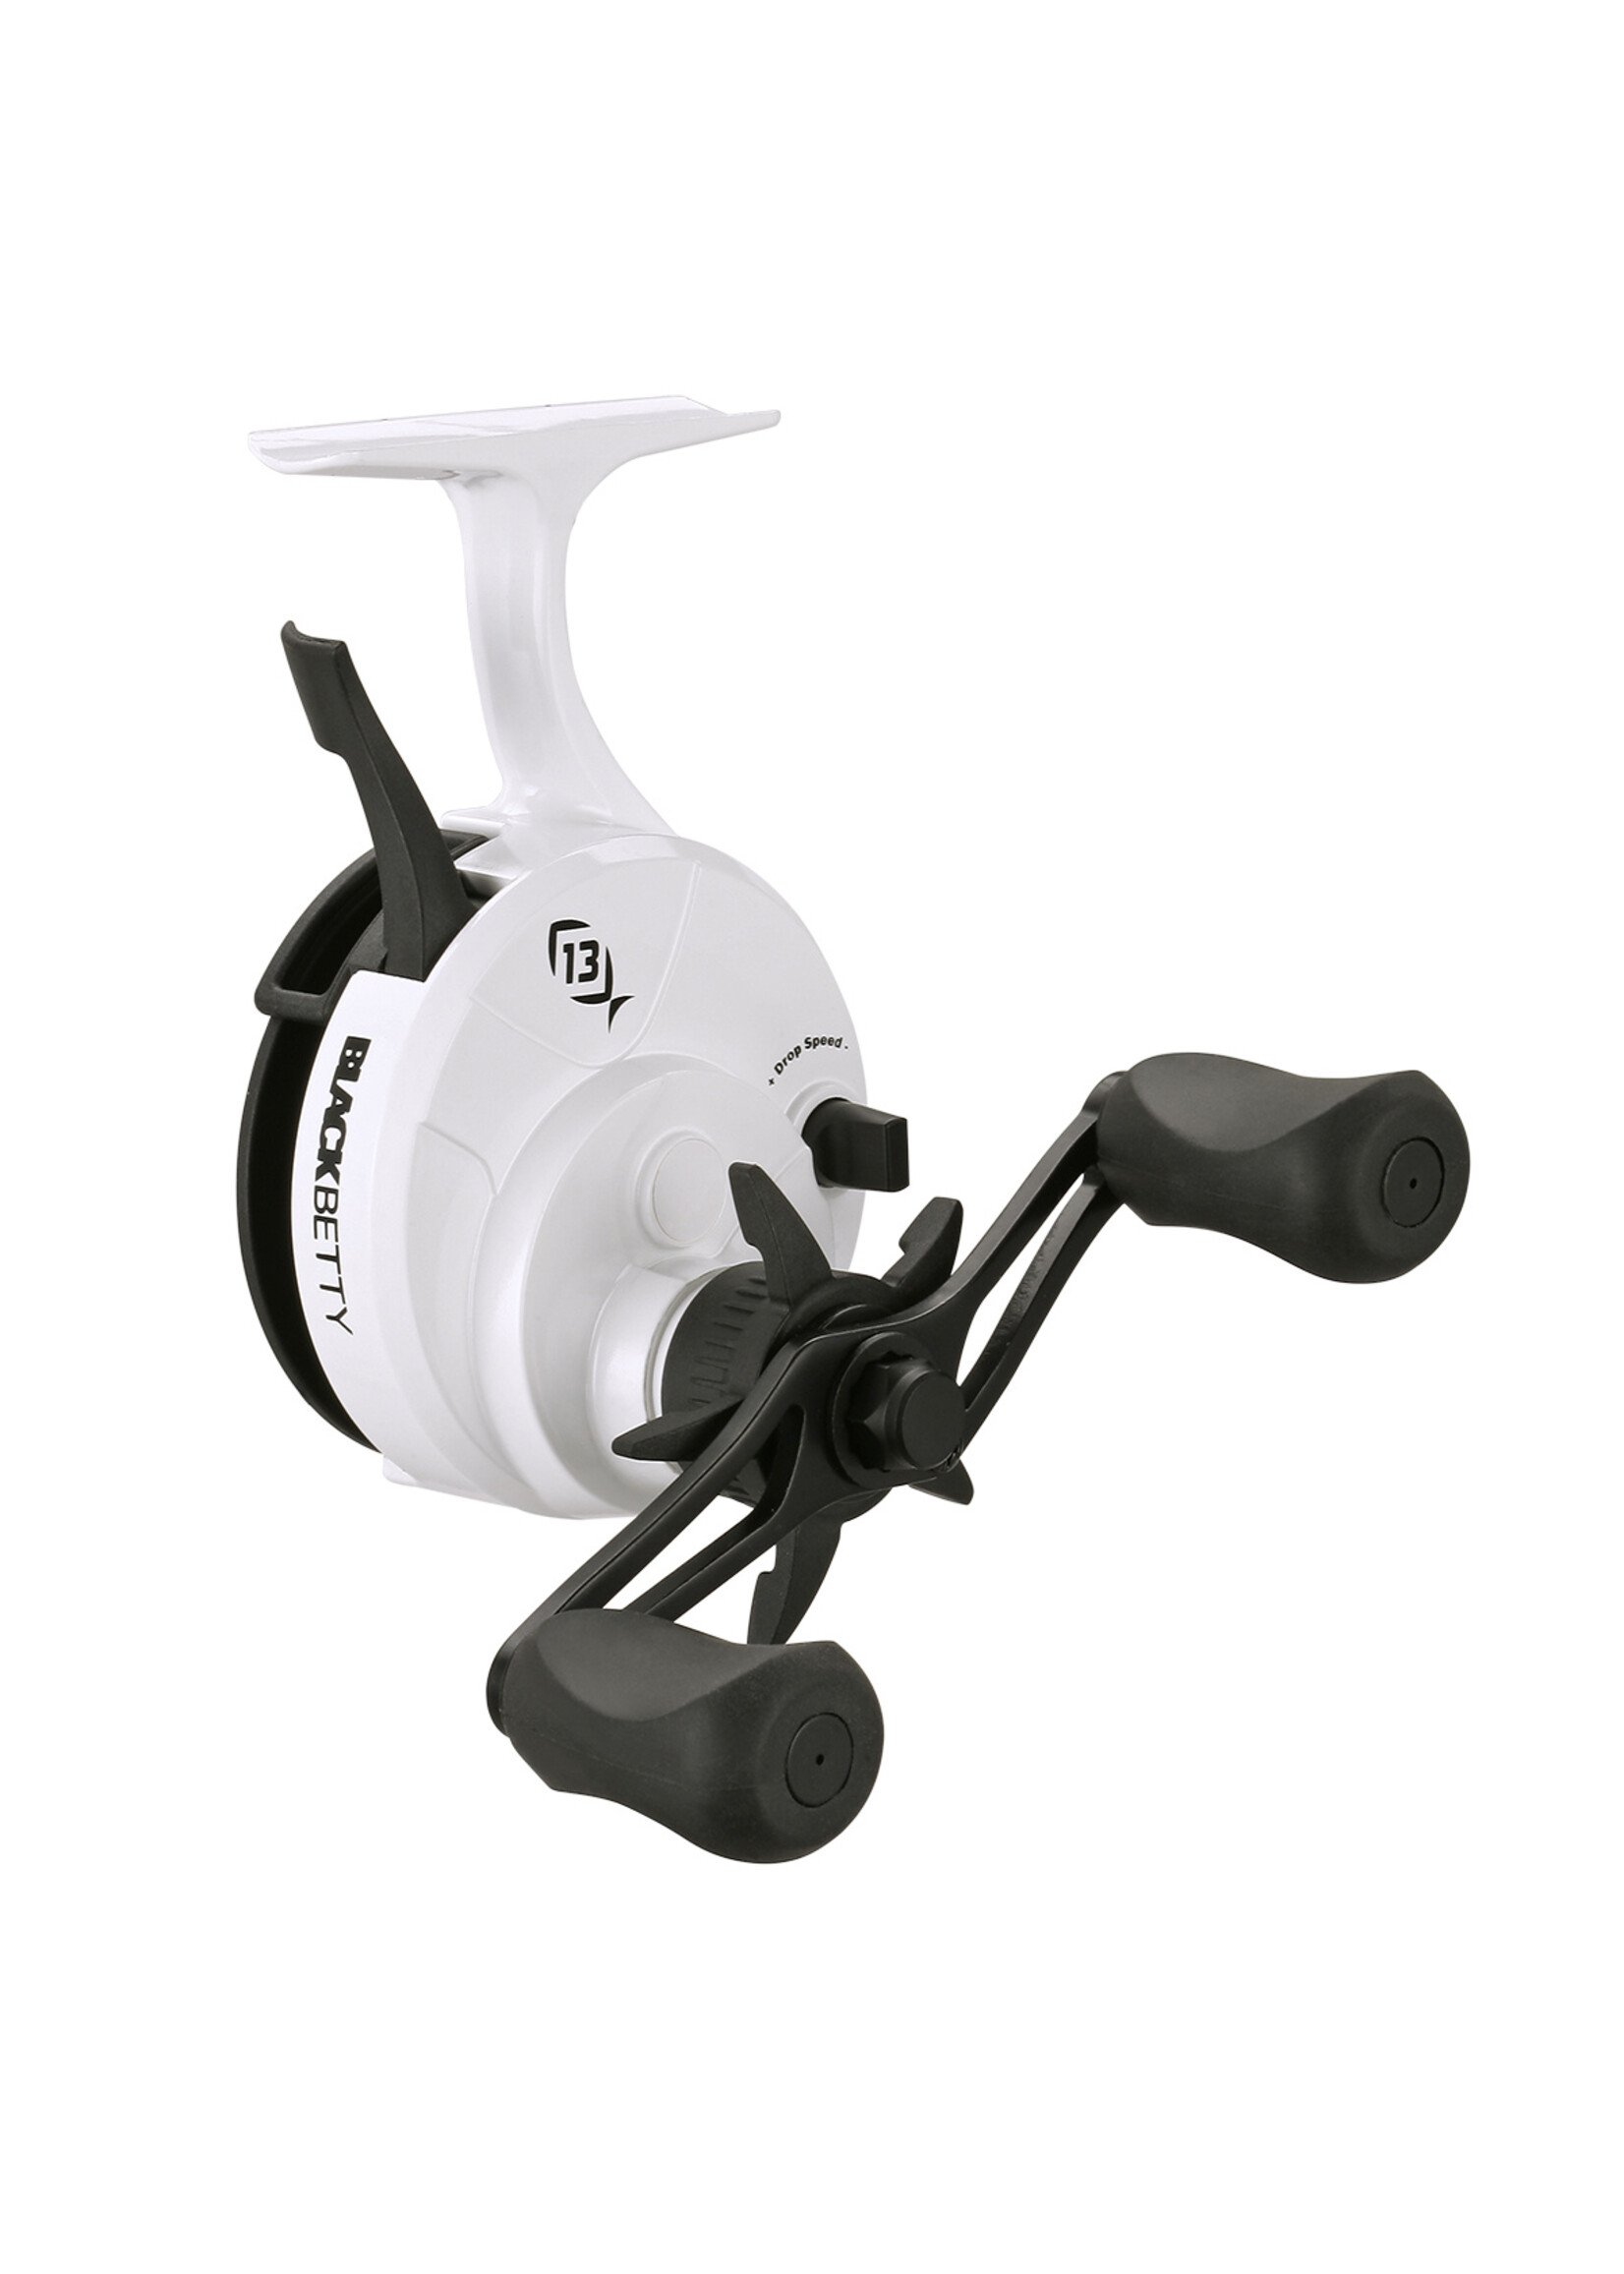 13 Fishing Black Betty FreeFall Ghost - Tackle Shack